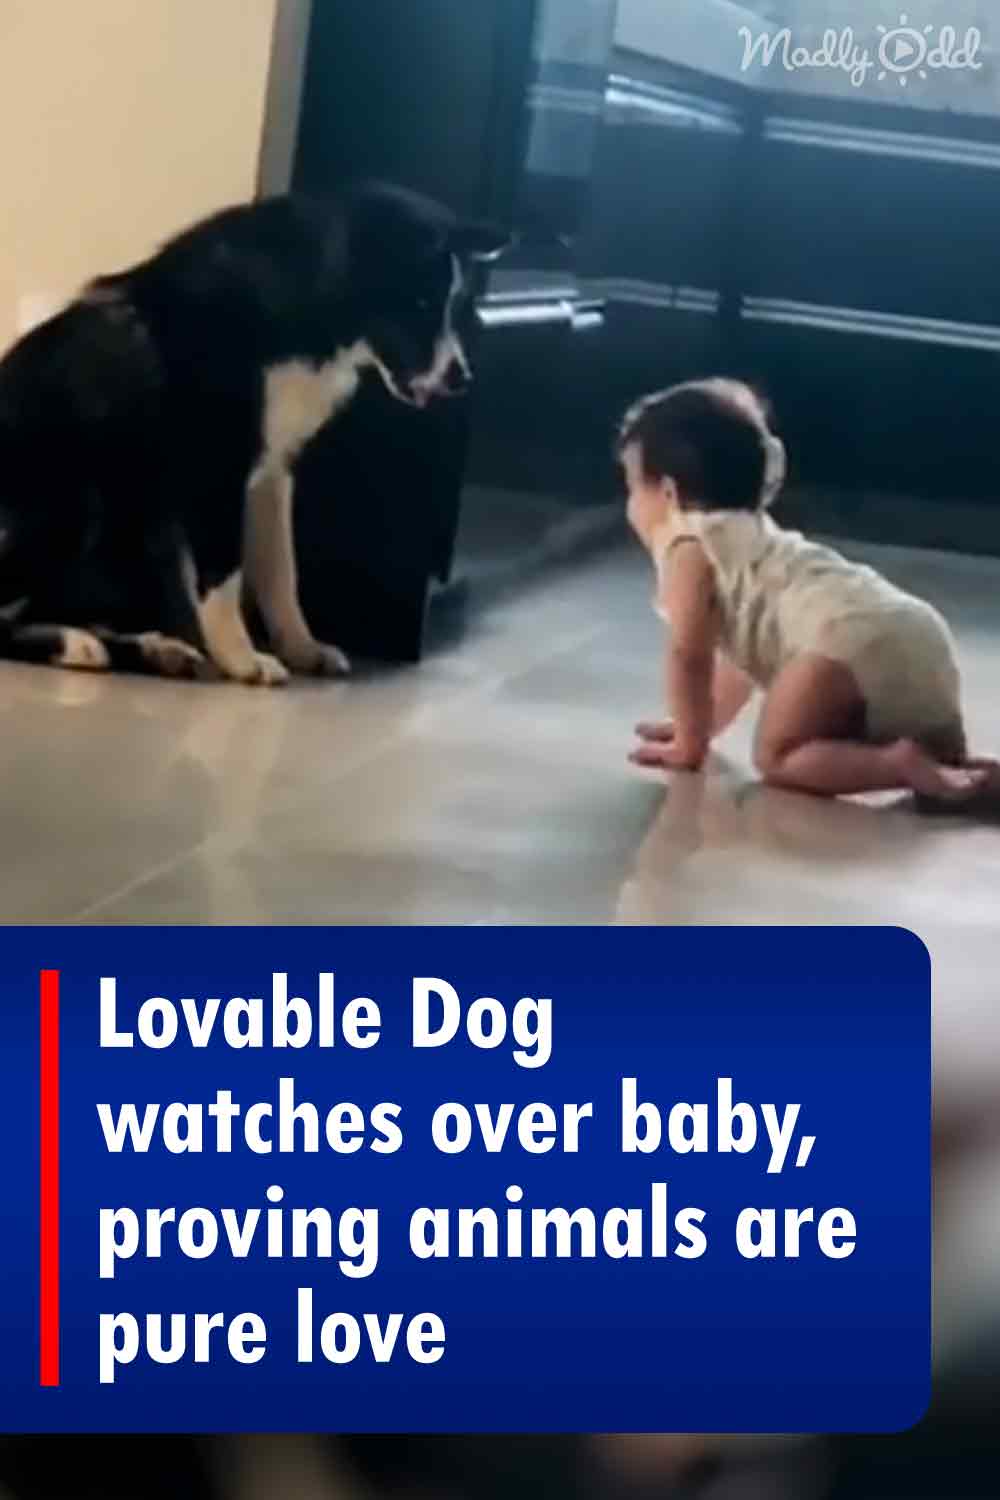 Lovable Dog watches over baby, proving animals are pure love